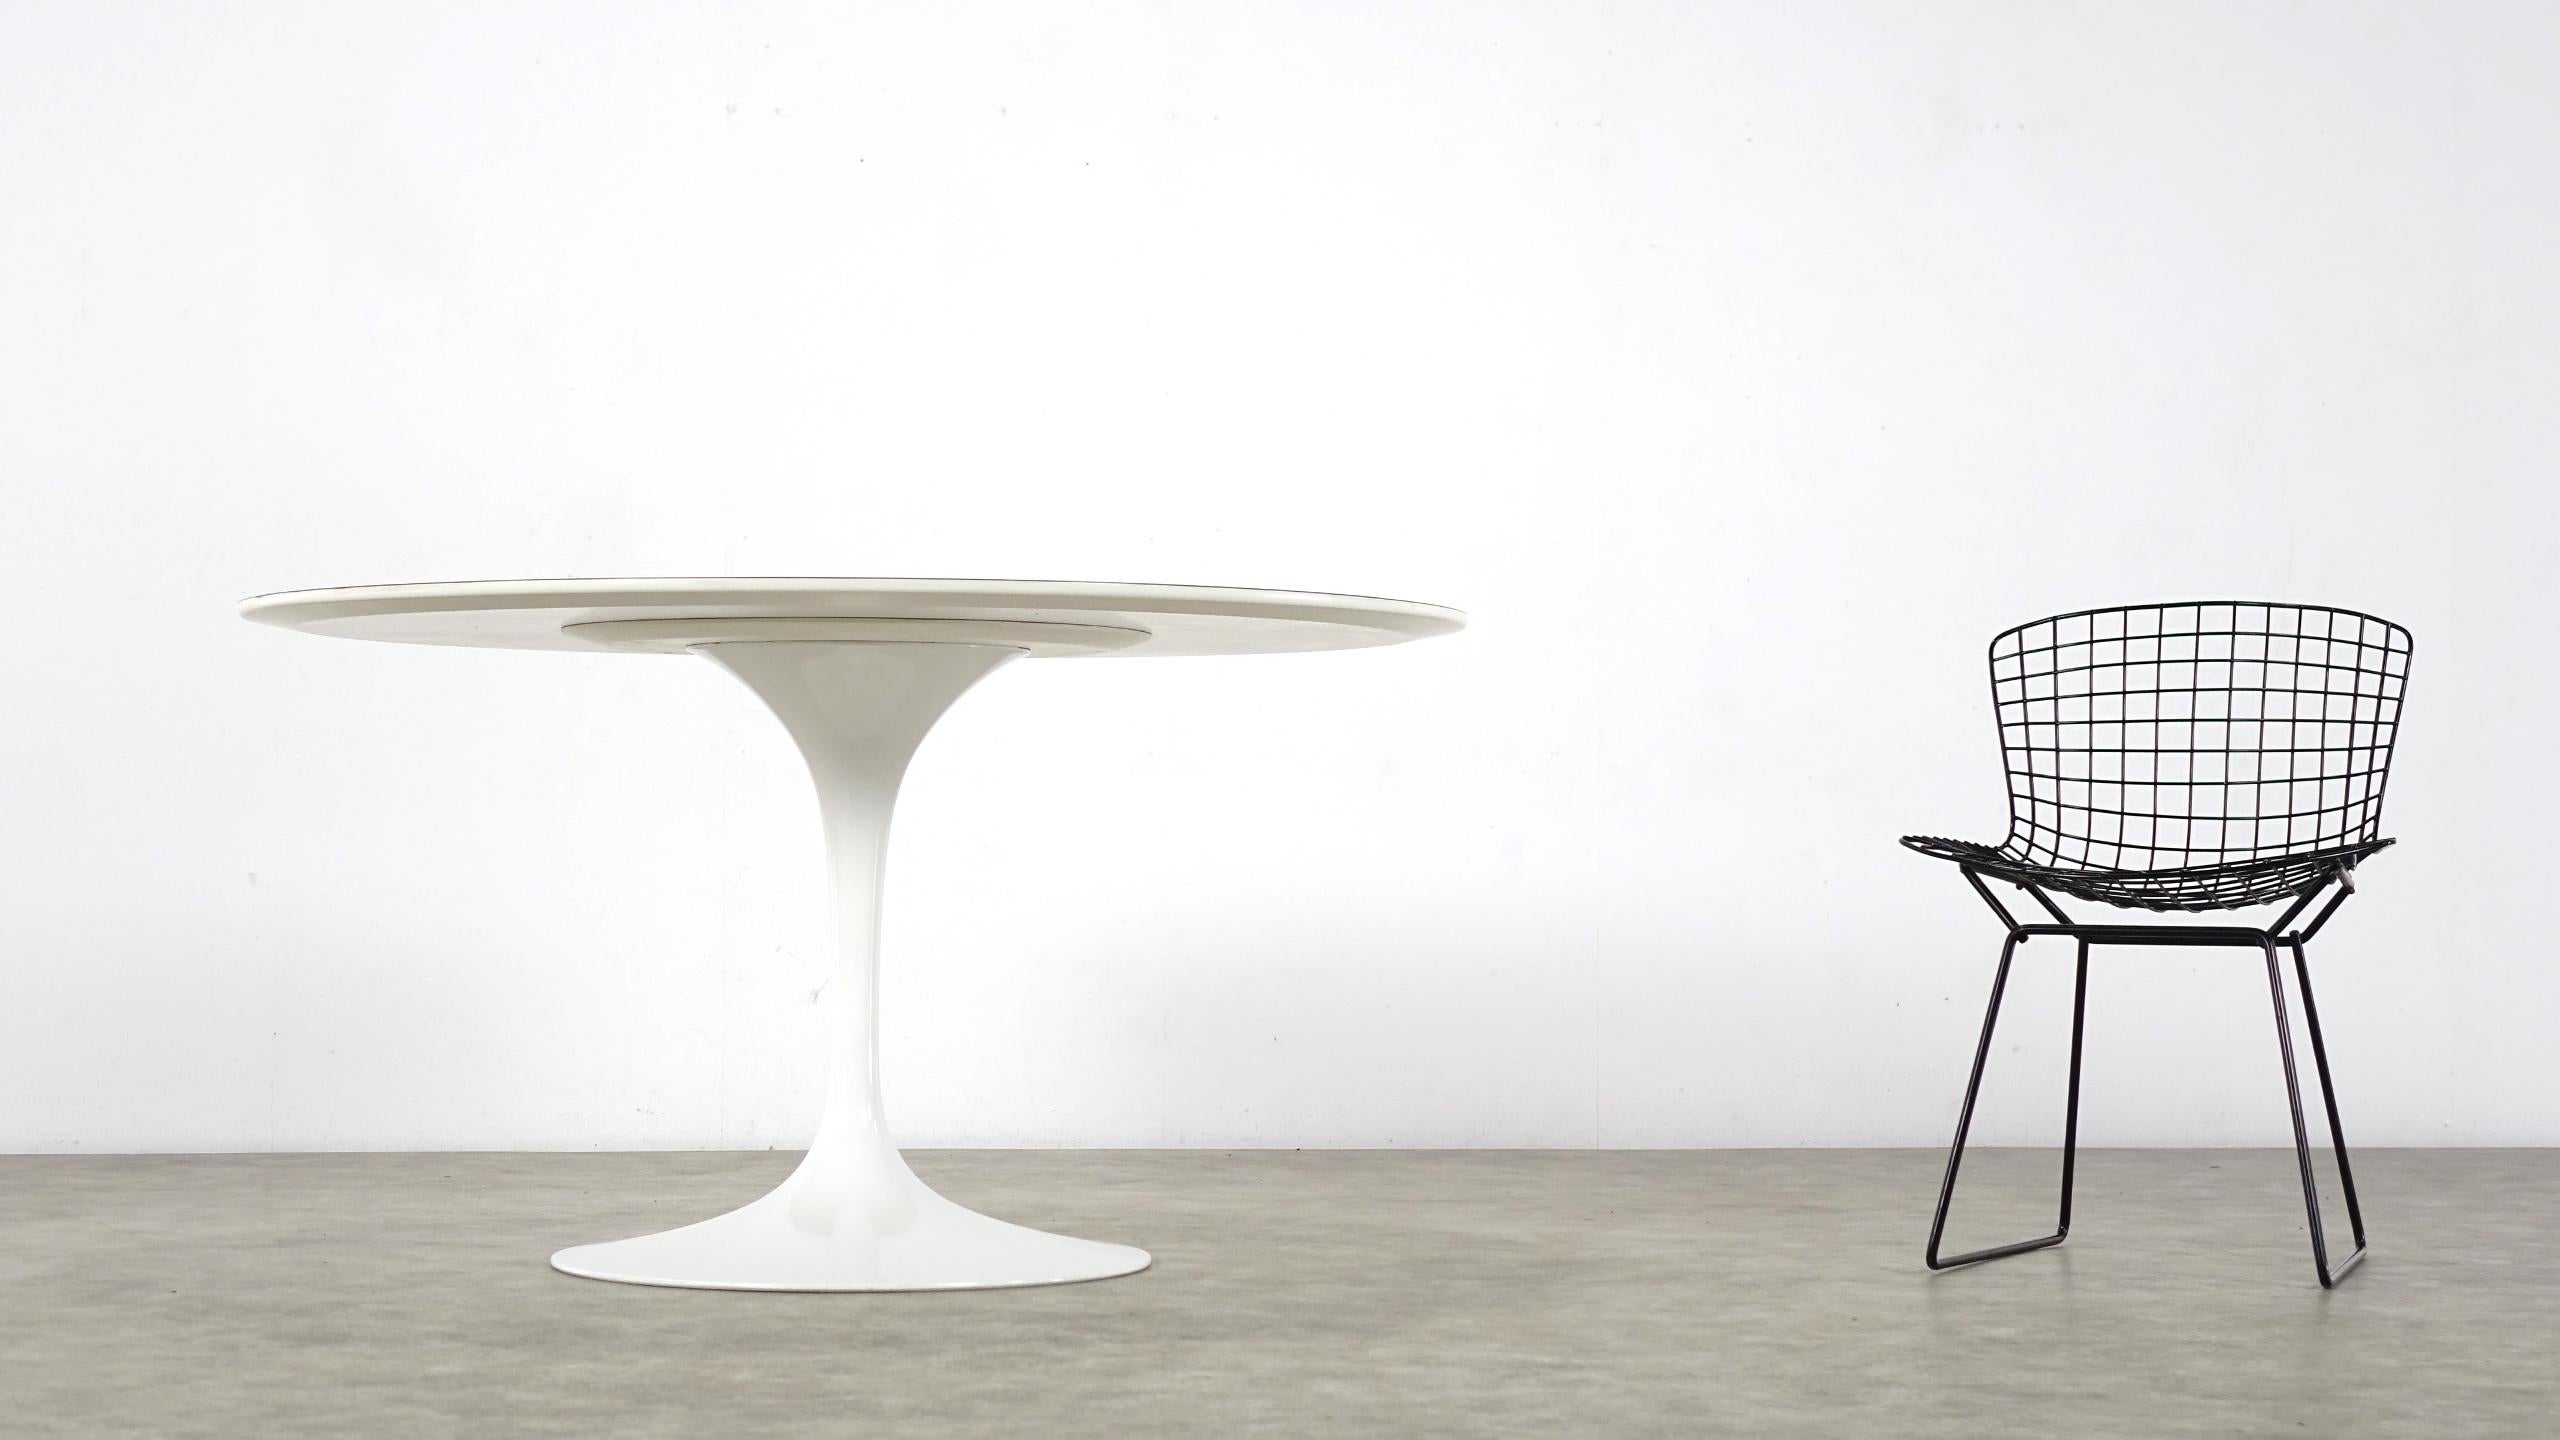 Eero Saarinen Laminated Tulip Dining Table, 1955 for Knoll International In Good Condition In Munster, NRW